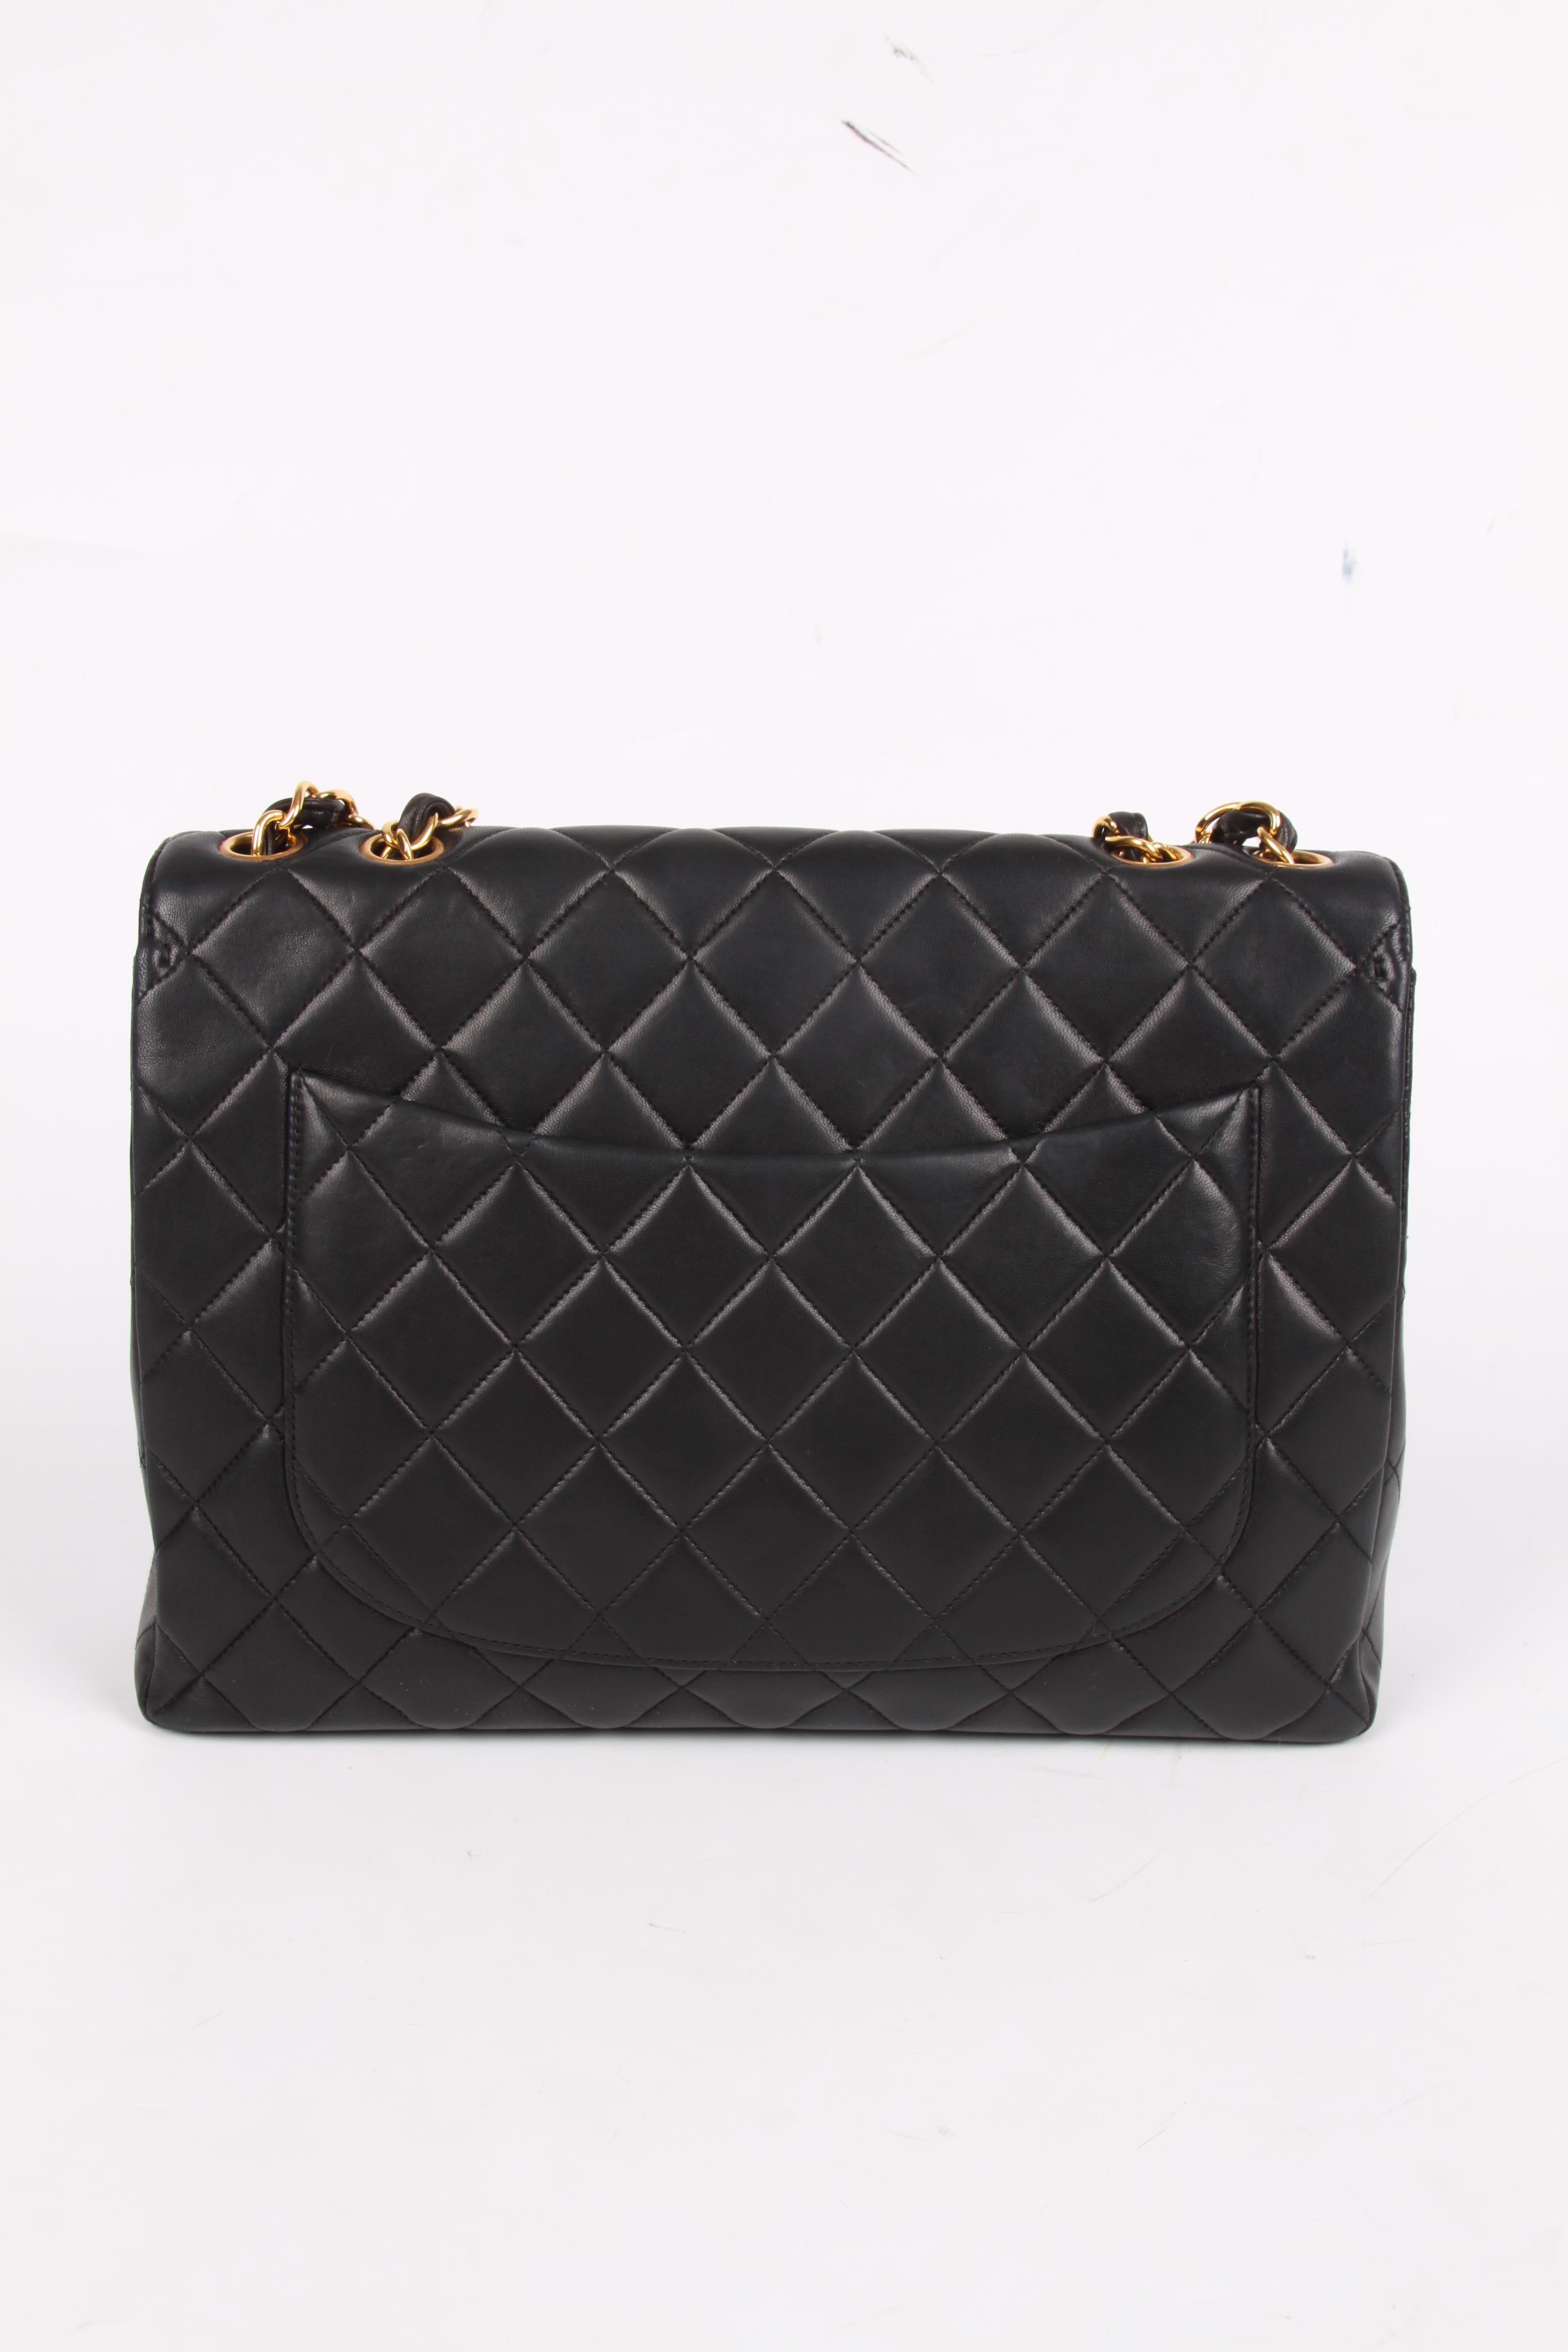 Chanel Vintage Timeless Jumbo Single Flap Bag - black/gold In Good Condition For Sale In Baarn, NL